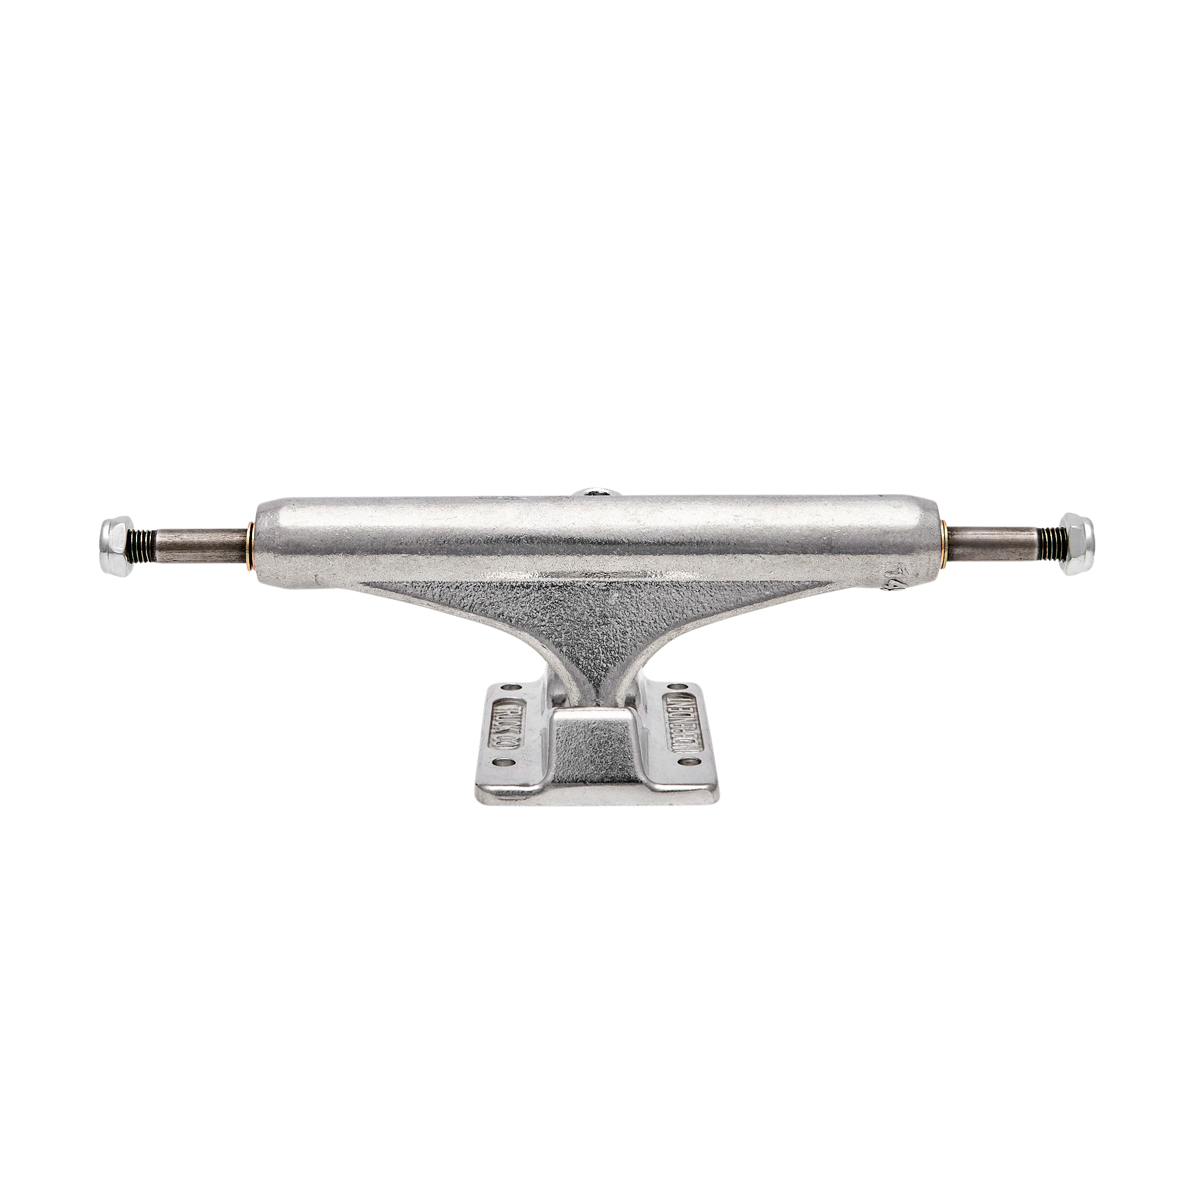 Independent Stage 11 Mid Forged Hollow Trucks - Polished